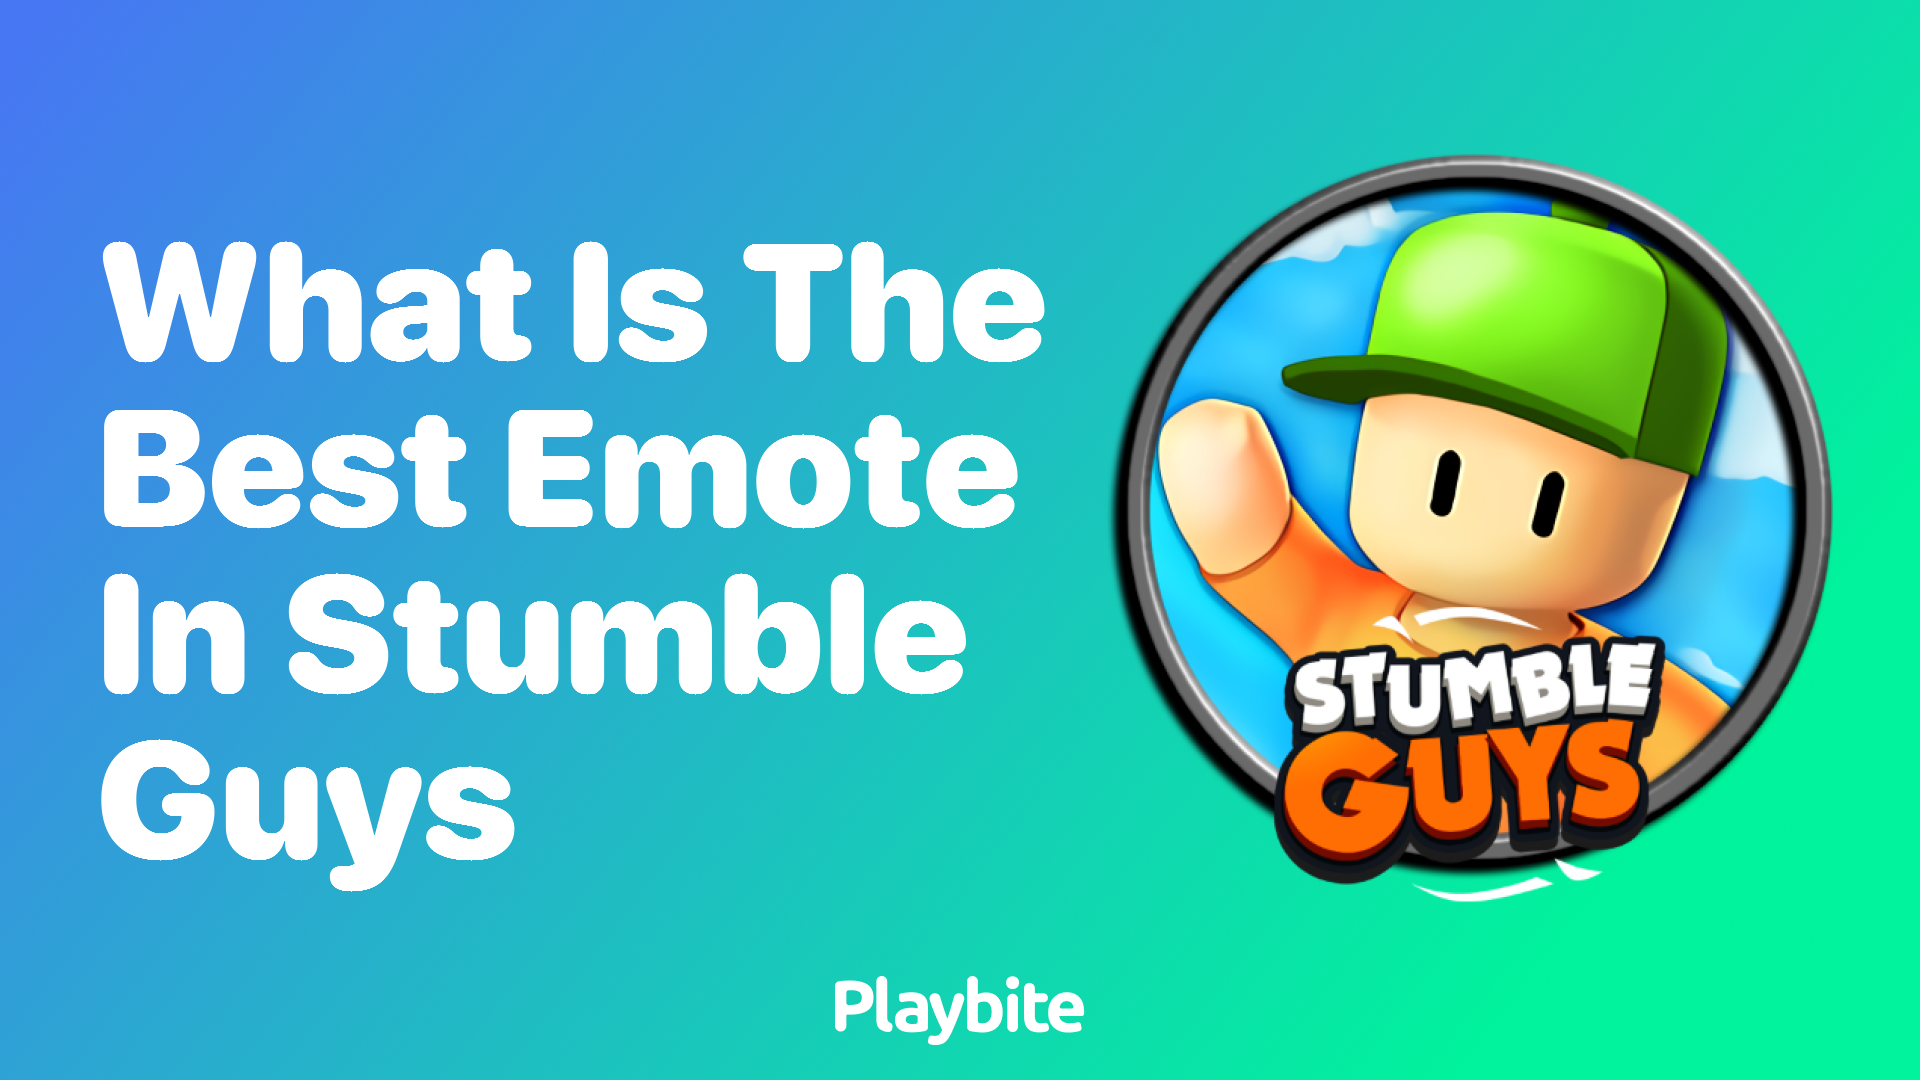 What Is the Best Emote in Stumble Guys?